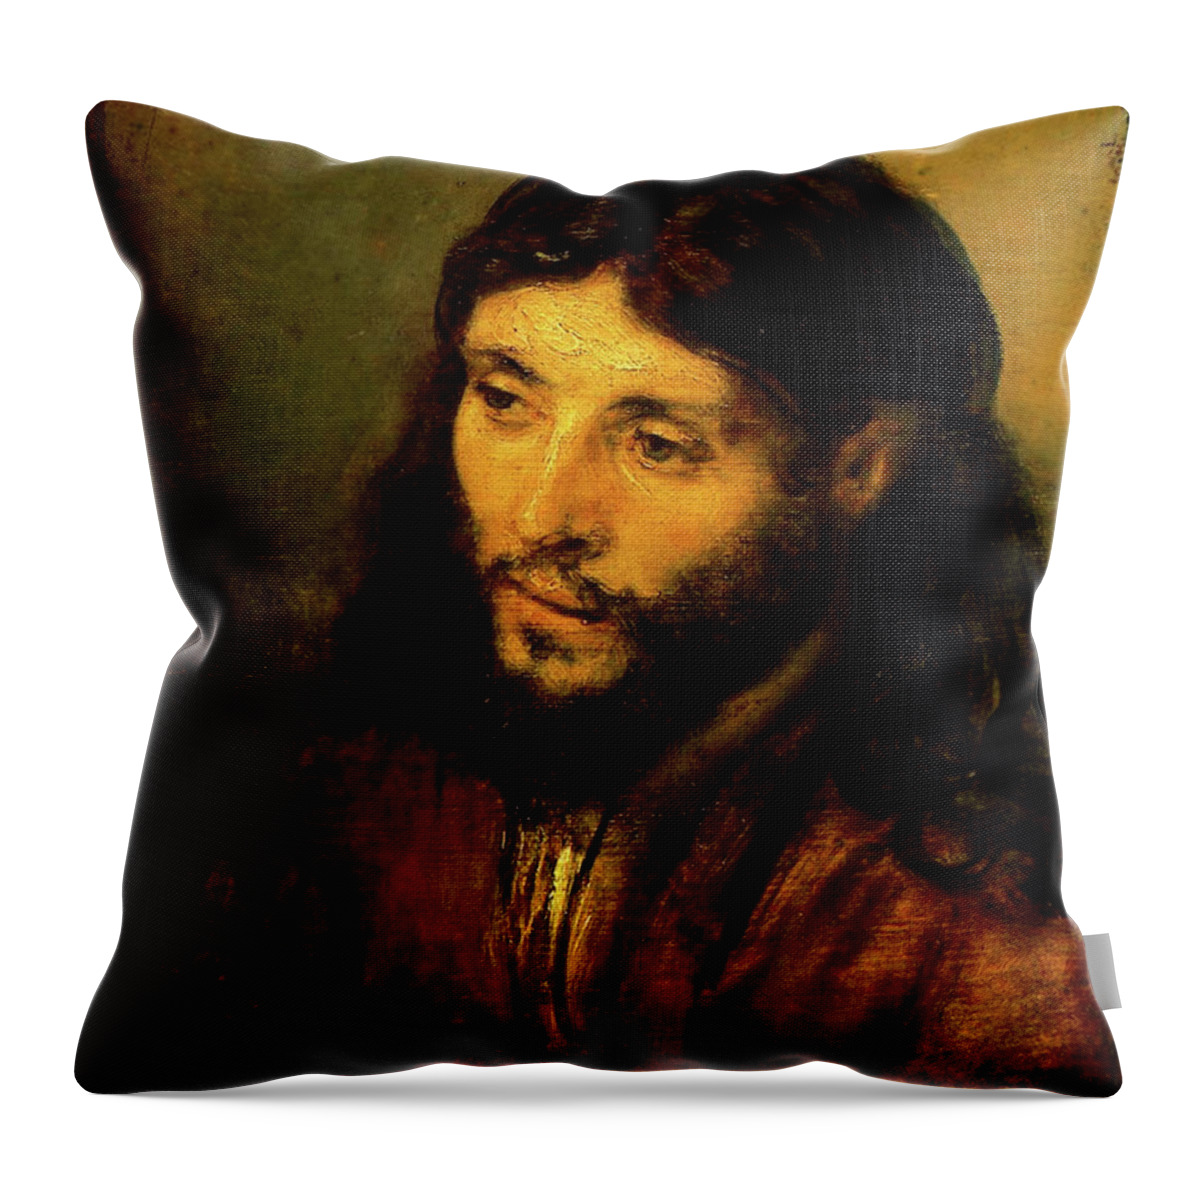 Christ Throw Pillow featuring the painting Head of Christ by Rembrandt van Rijn